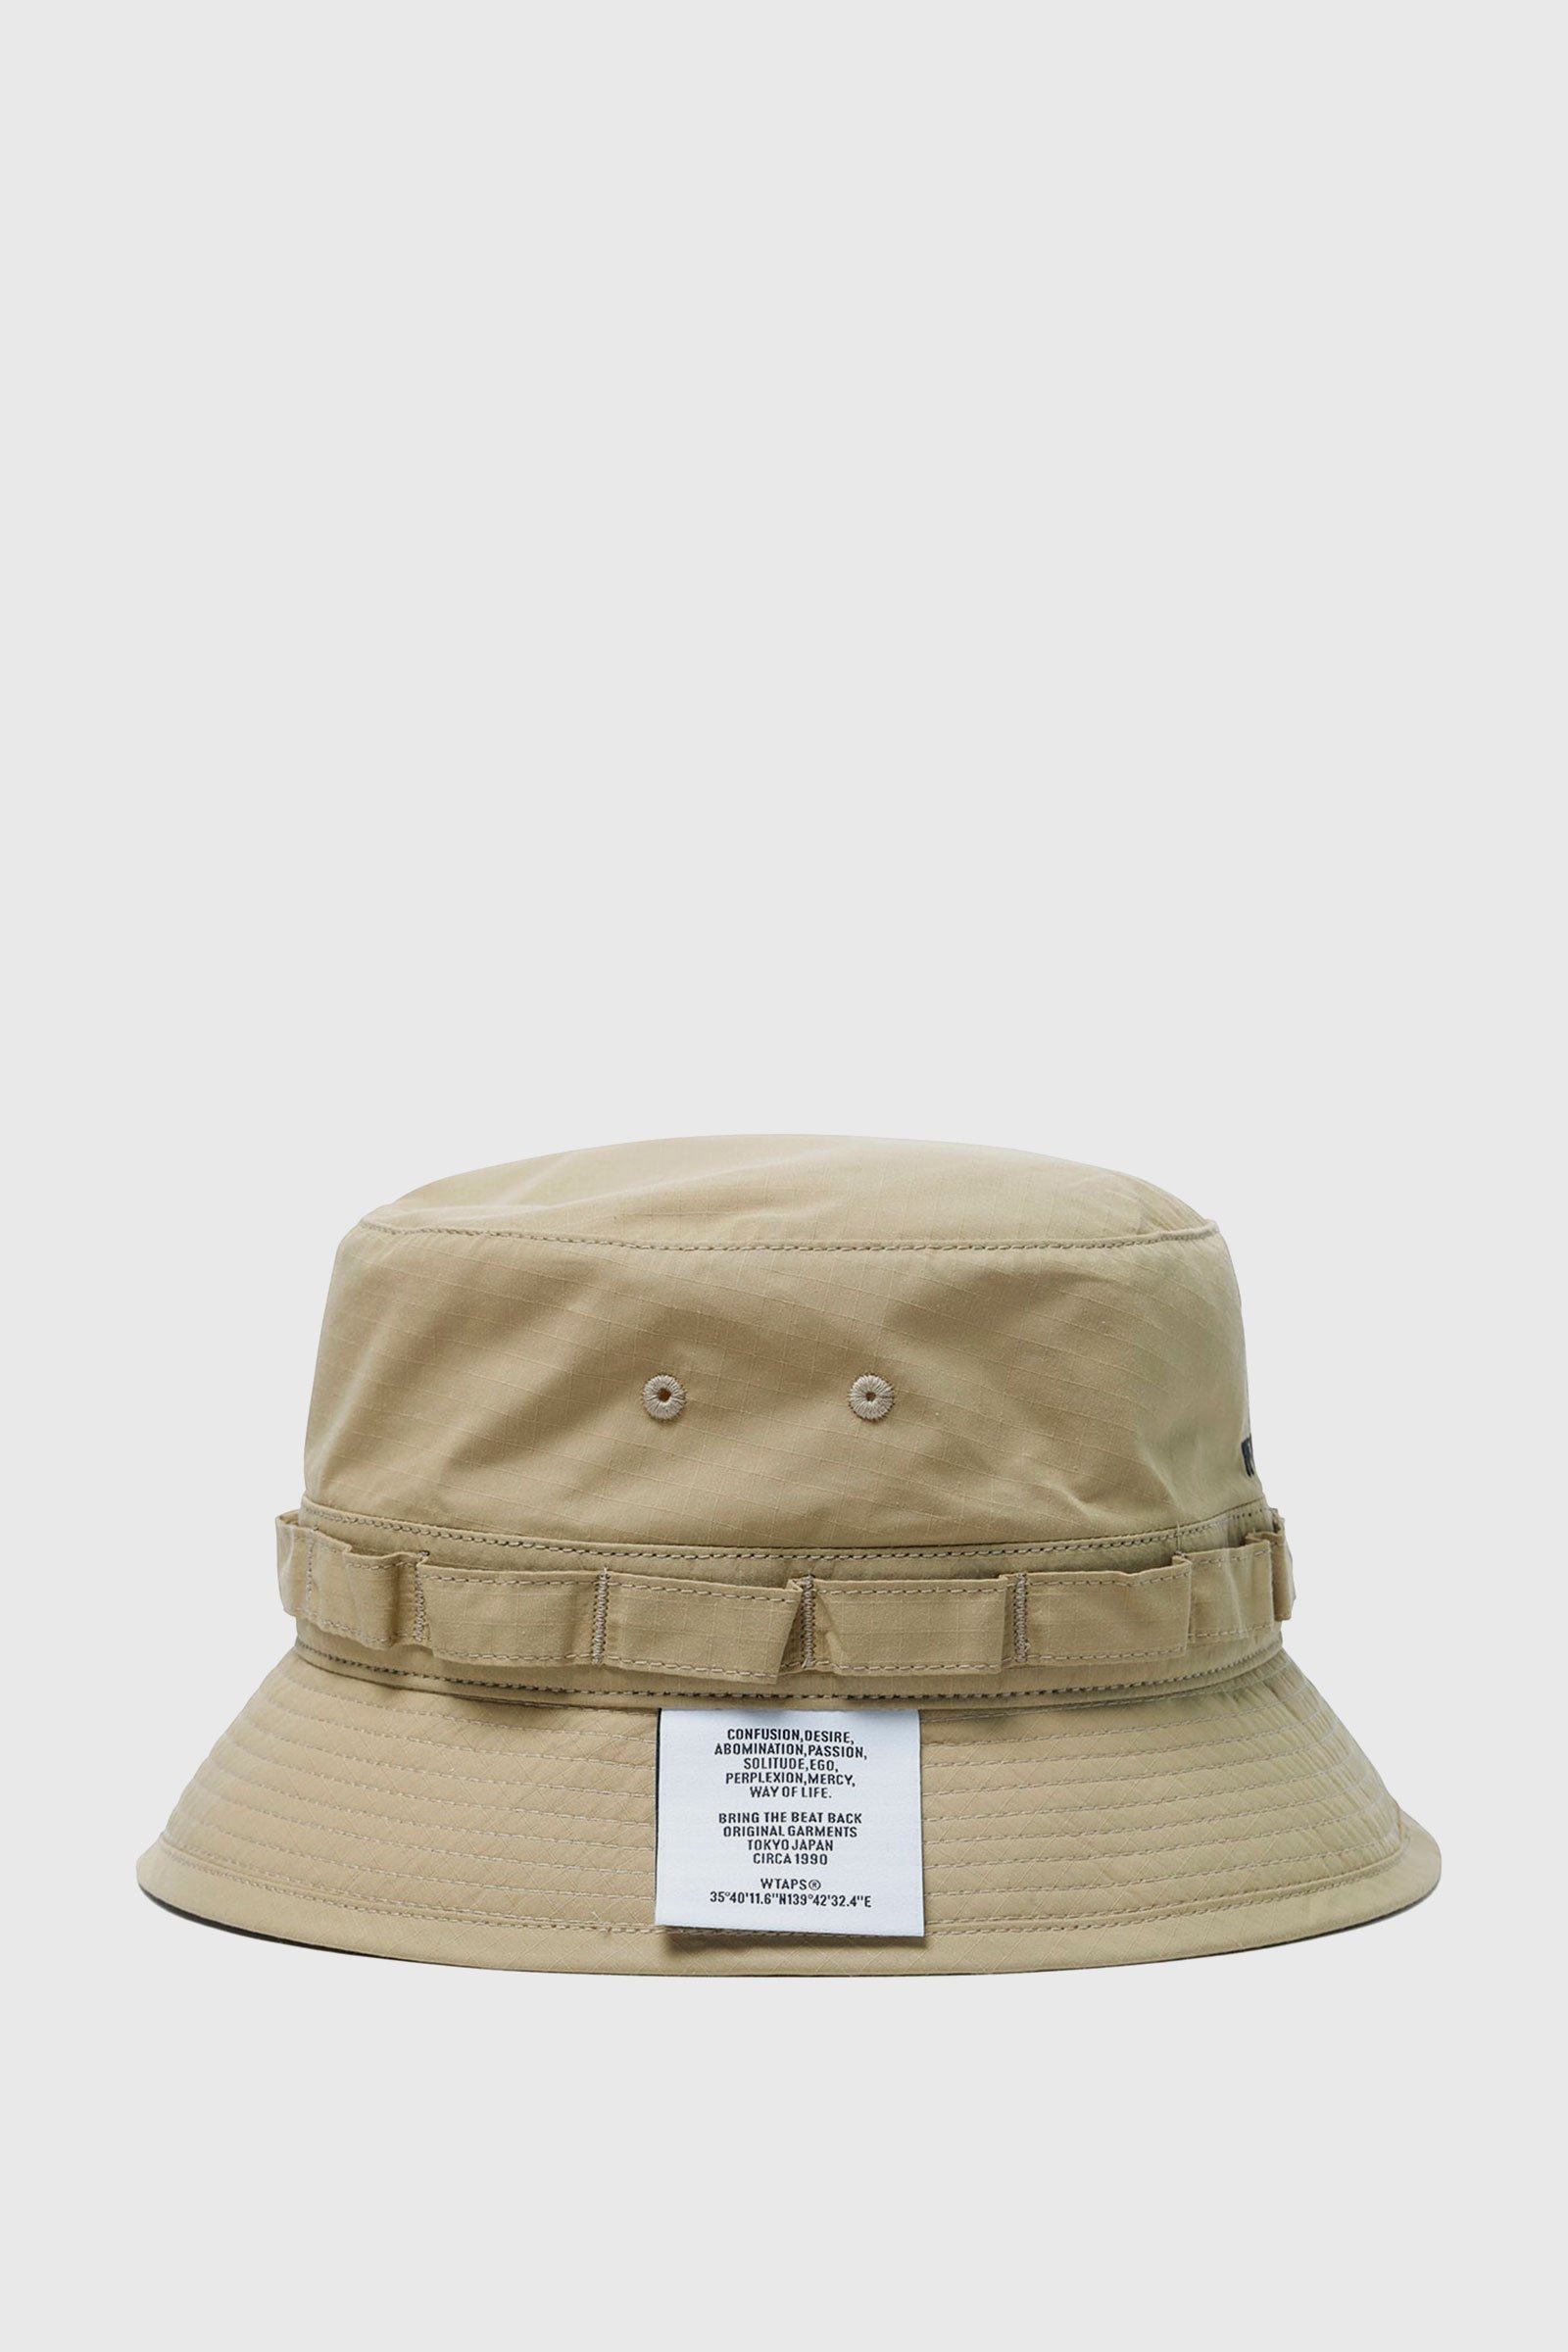 WTAPS JUNGLE 01 / HAT / NYCO.RIPSTOP Beige | WoodWood.com